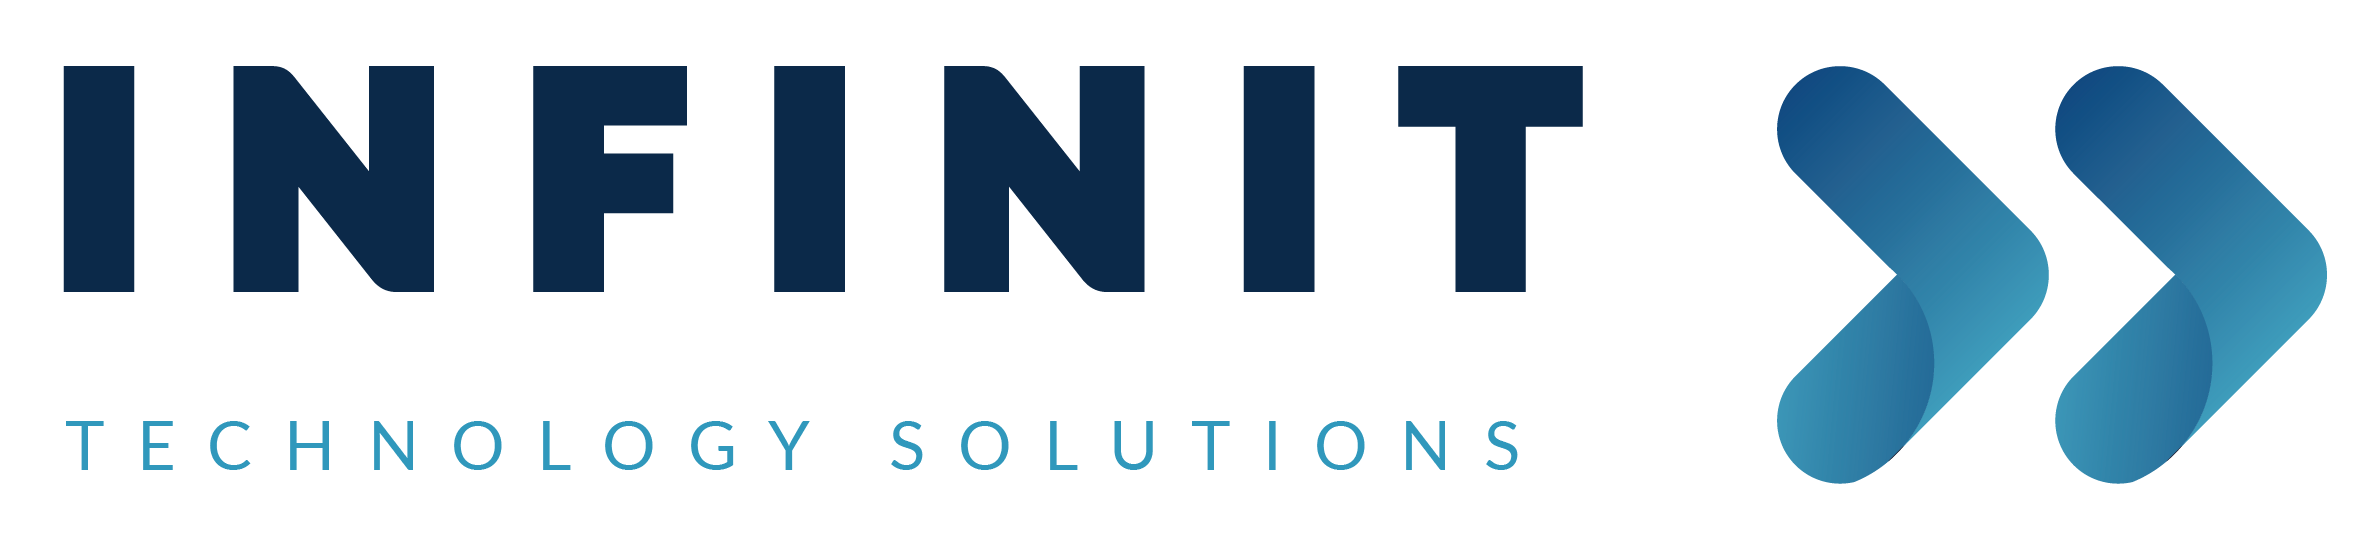 infinIT Technology Solutions